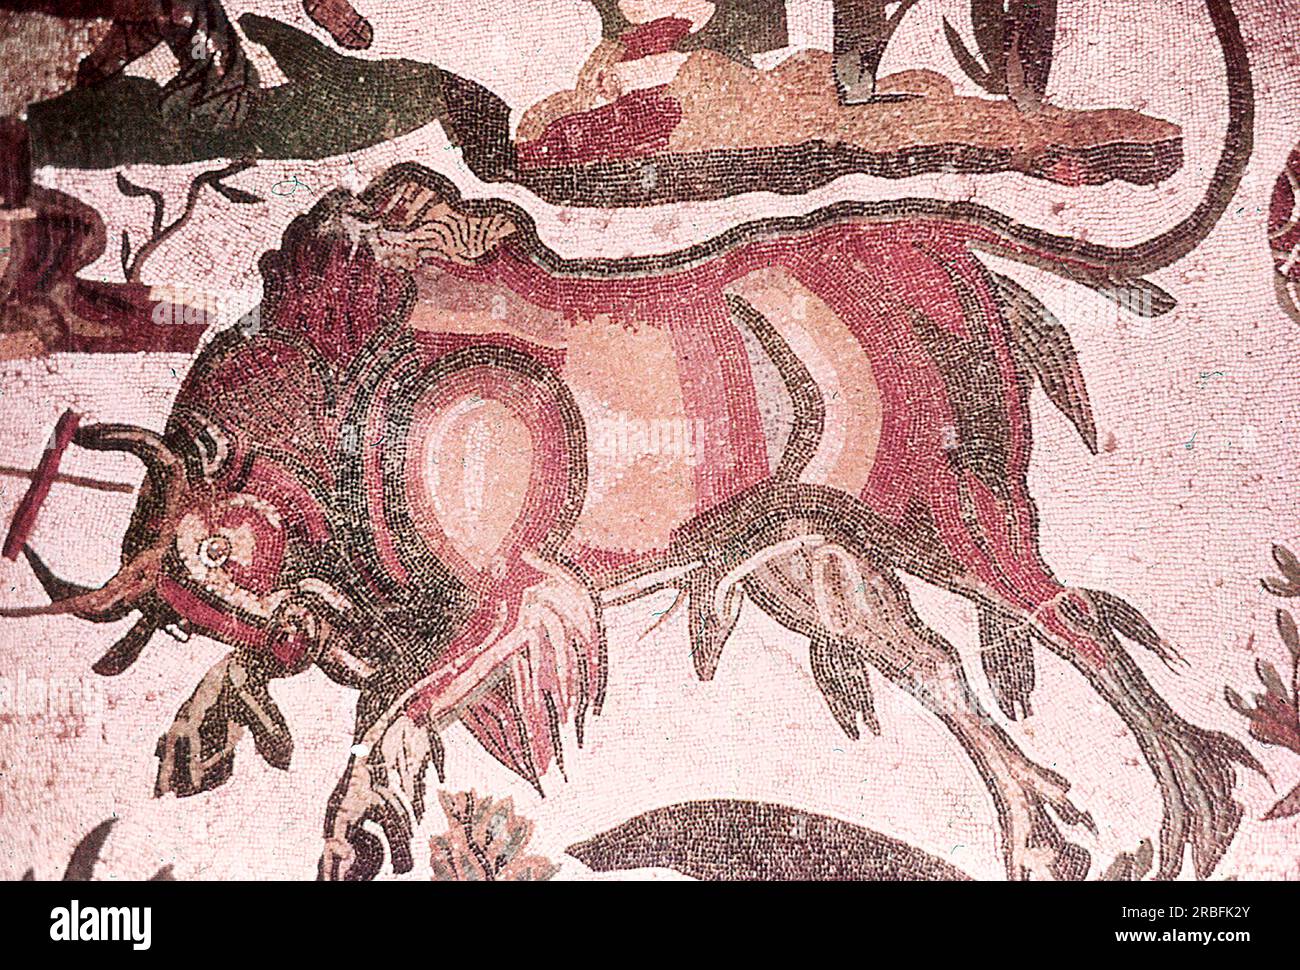 This photo of a mosaic showing the Great Hunt (capture of bison) was taken in the summer of 1970 at Piazza Armerina in Sicily. Piazza Armerina is home to the Roman Villa del Casale and its famous mosaics, the 'finest mosaics in situ anywhere in the Roman world,' as described by UNESCO, which inserted it into its World Heritage list in 1997. Villa Romana was a lavish patrician residence built at the center of a huge latifundium (agricultural estate) at the end of the 4th century AD. It is thought to have belonged to a member of the Roman senatorial aristocracy, who traded in exotic animals.  Th Stock Photo